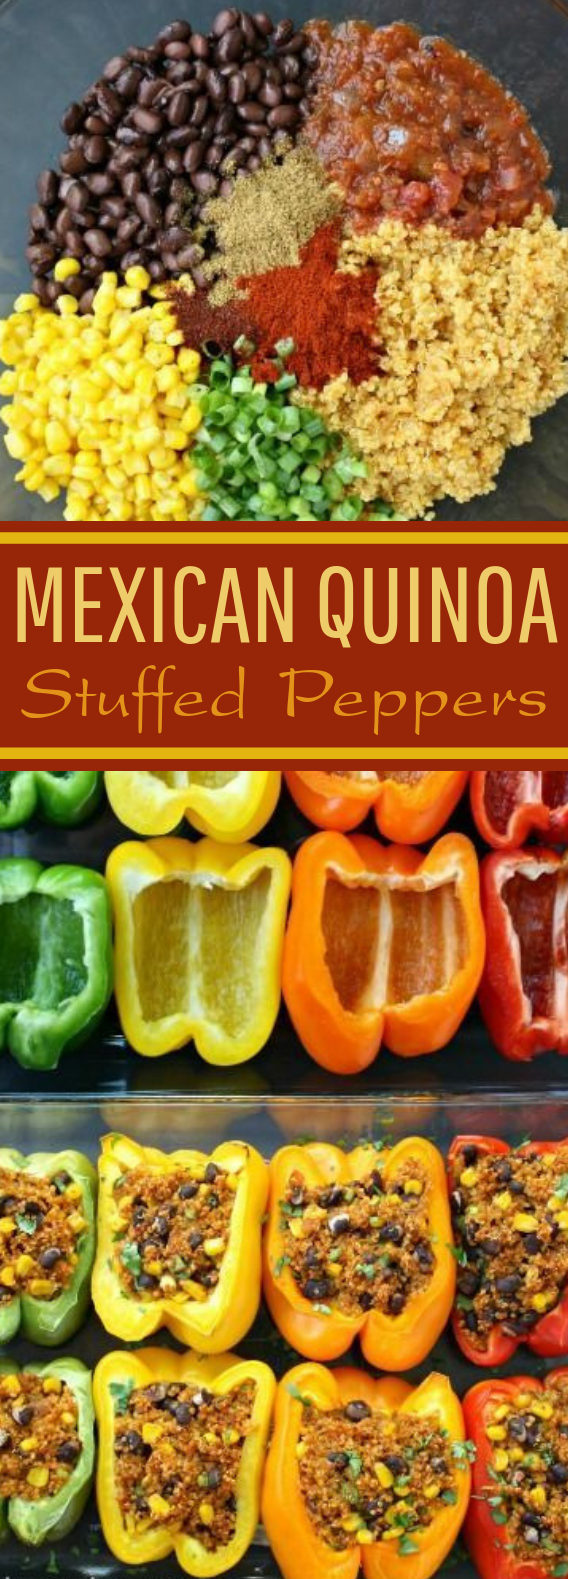 Mexican Quinoa Stuffed Peppers #healthy #vegetarian